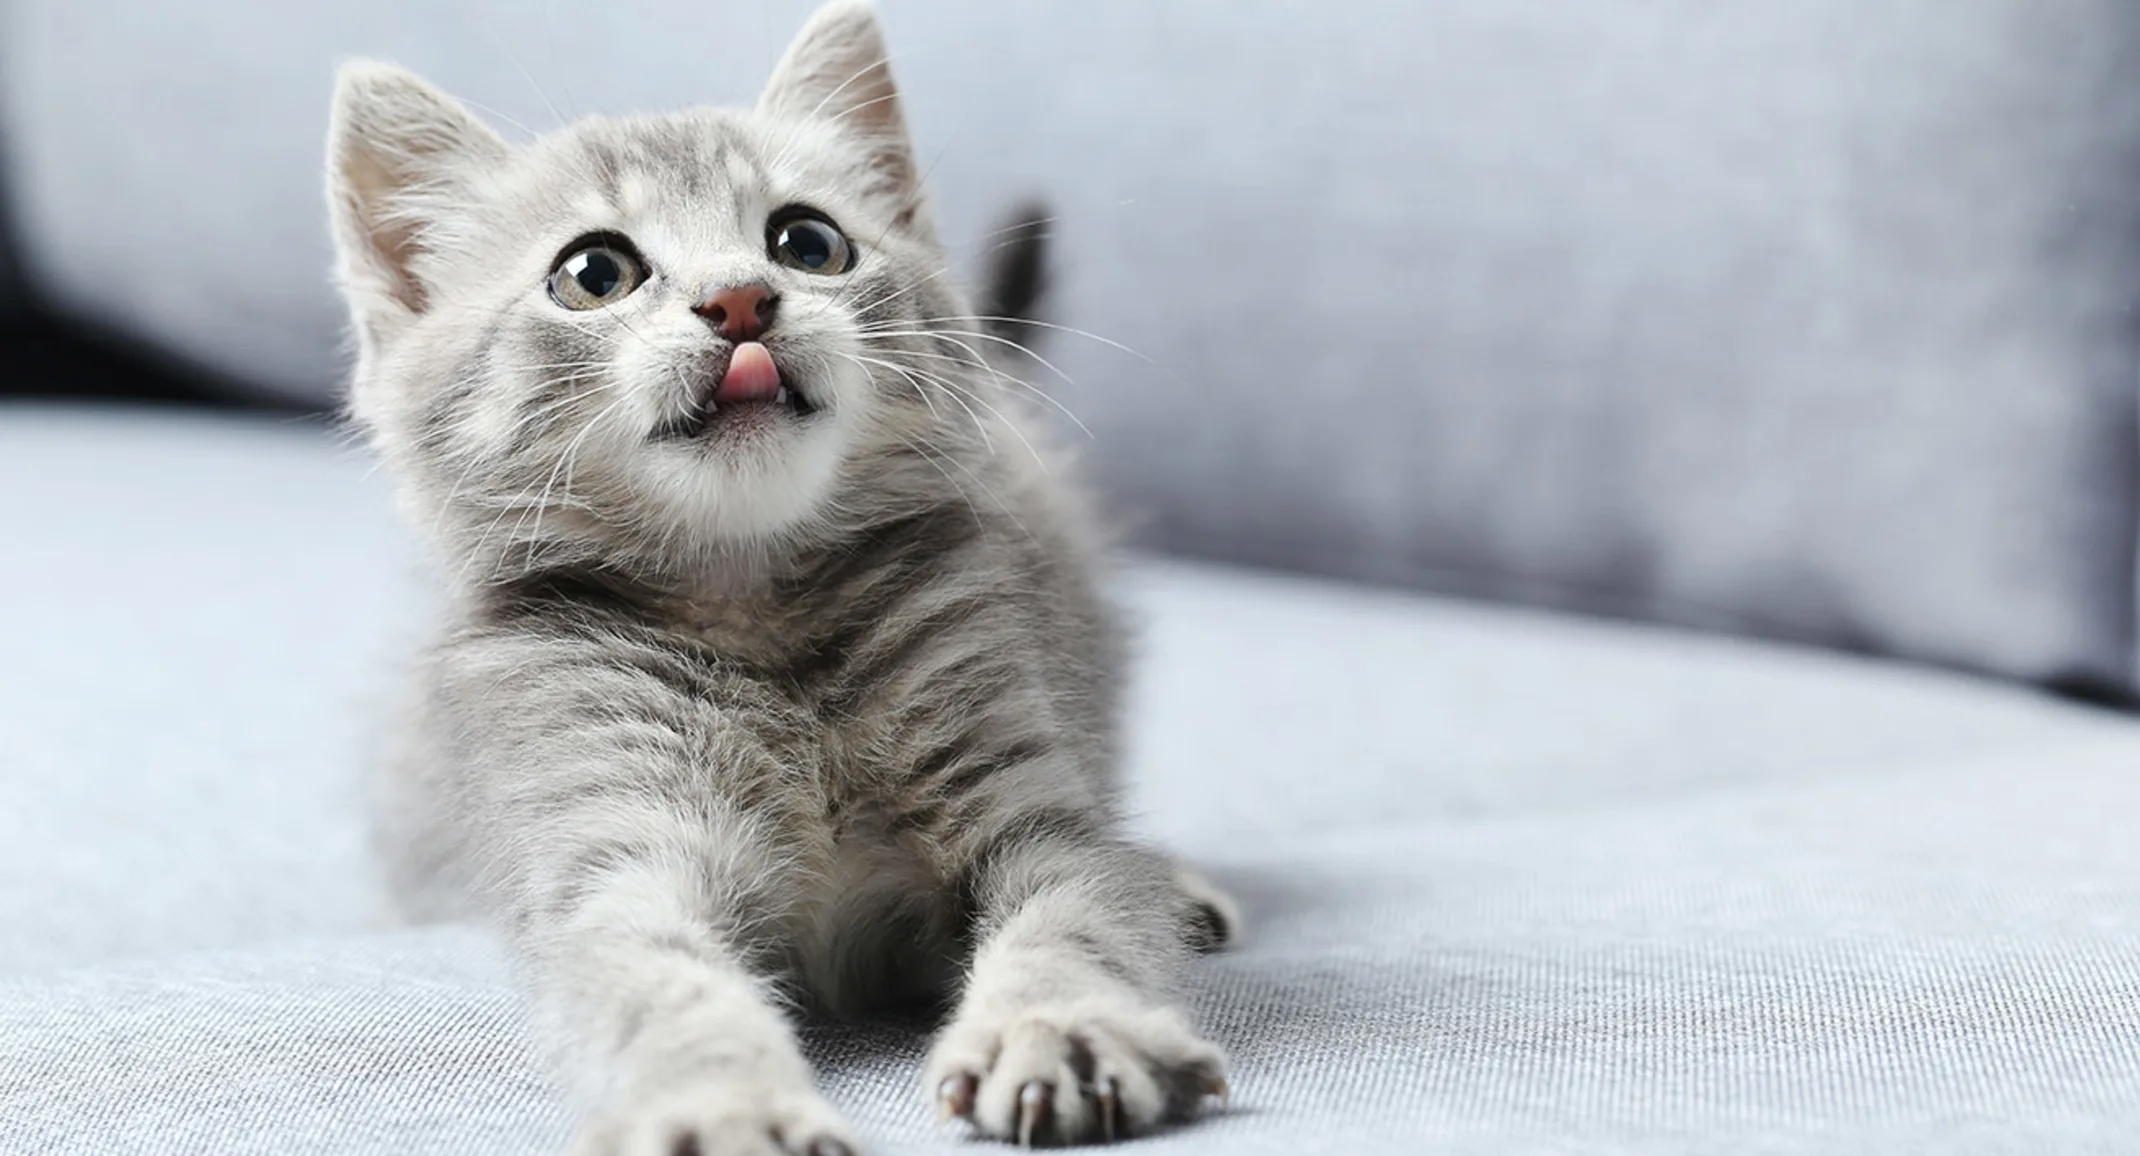 Kitten with tongue out on couch